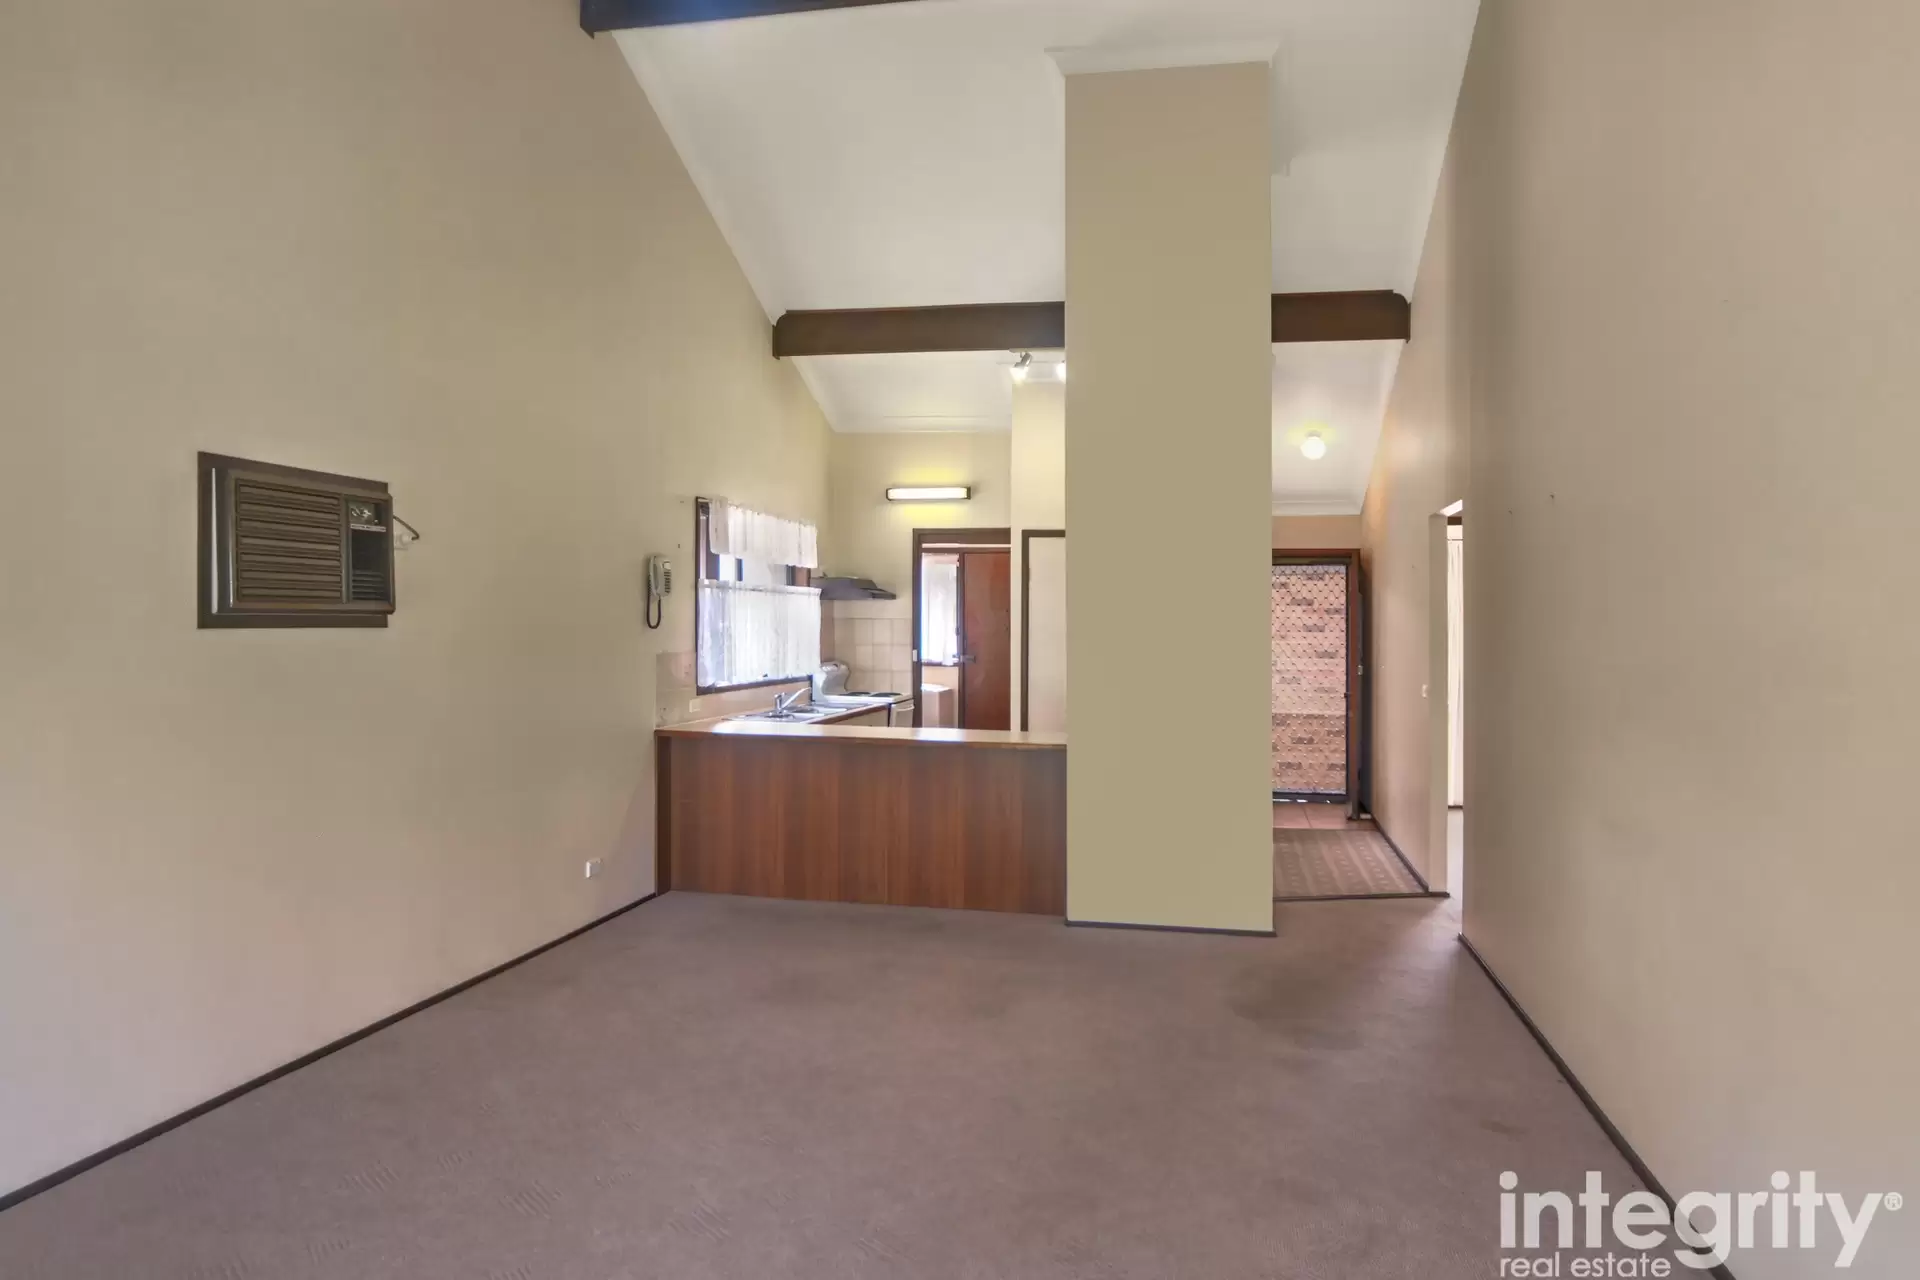 1/27 Bowada Street, Bomaderry Sold by Integrity Real Estate - image 2